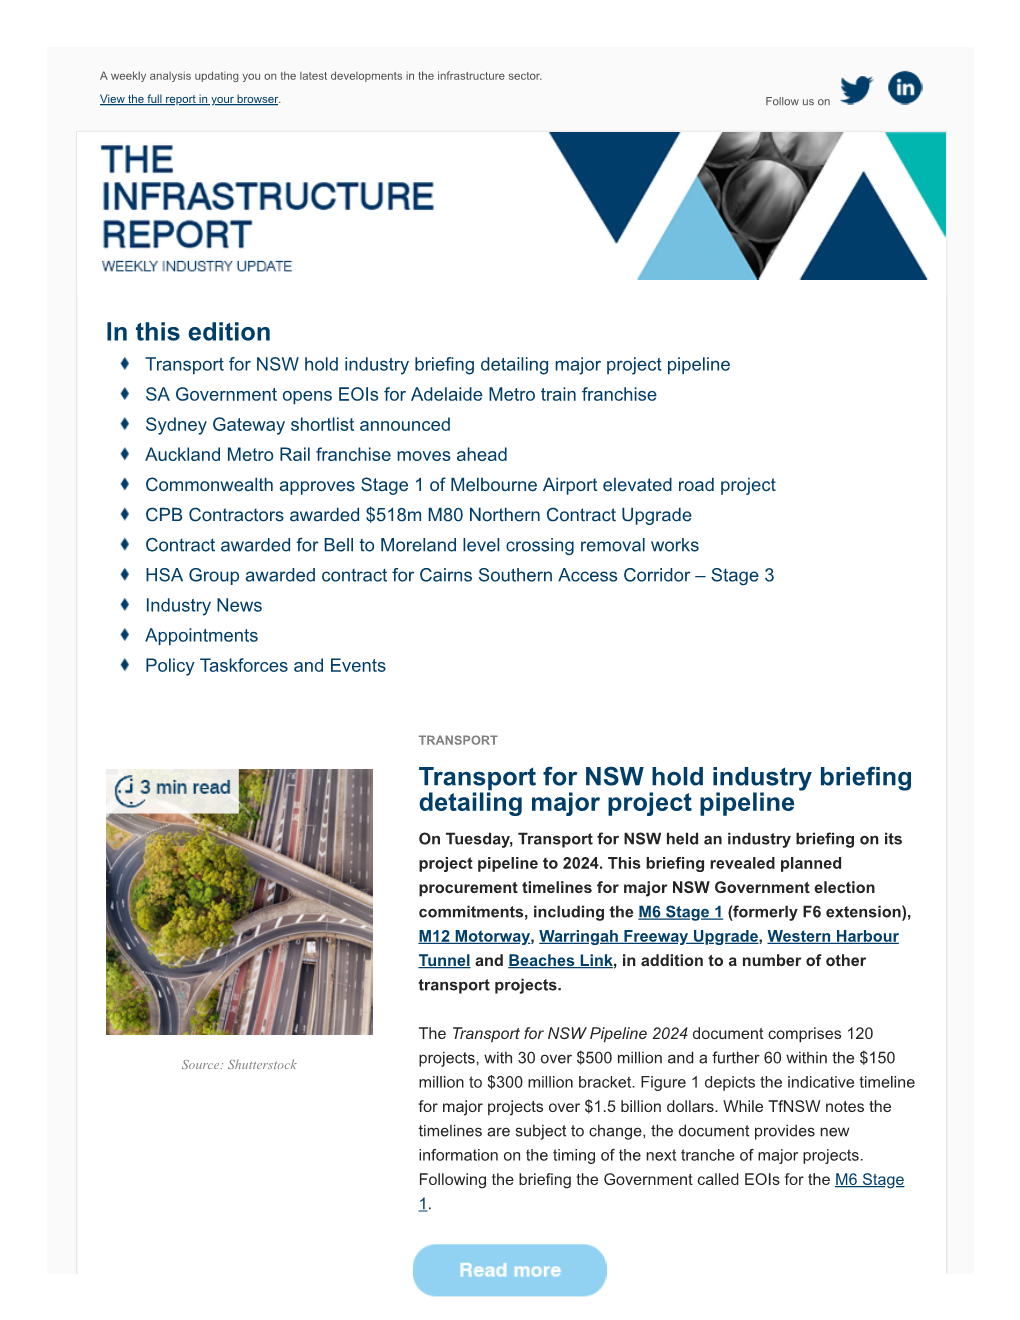 In This Edition Transport for NSW Hold Industry Briefing Detailing Major